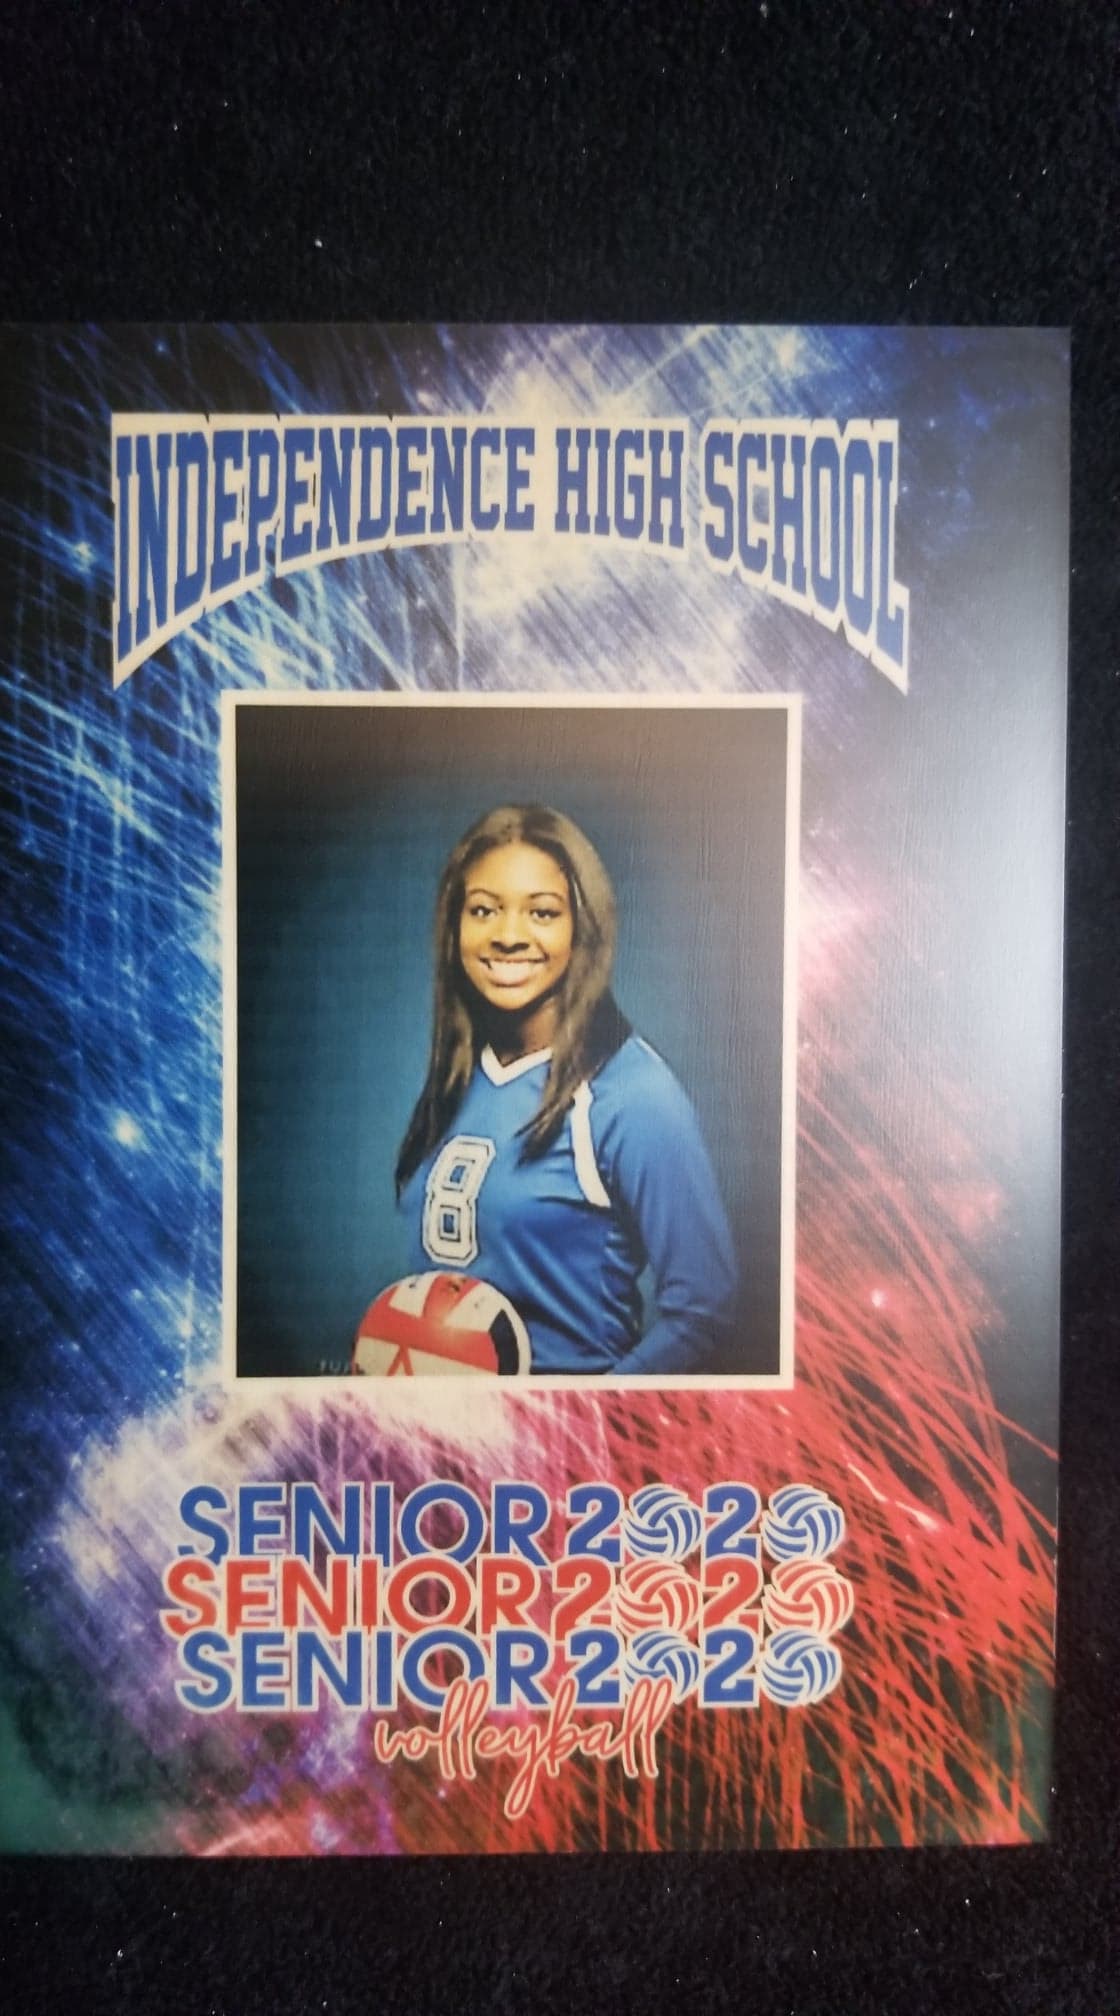 Senior Volleyball photo made with sublimation printing